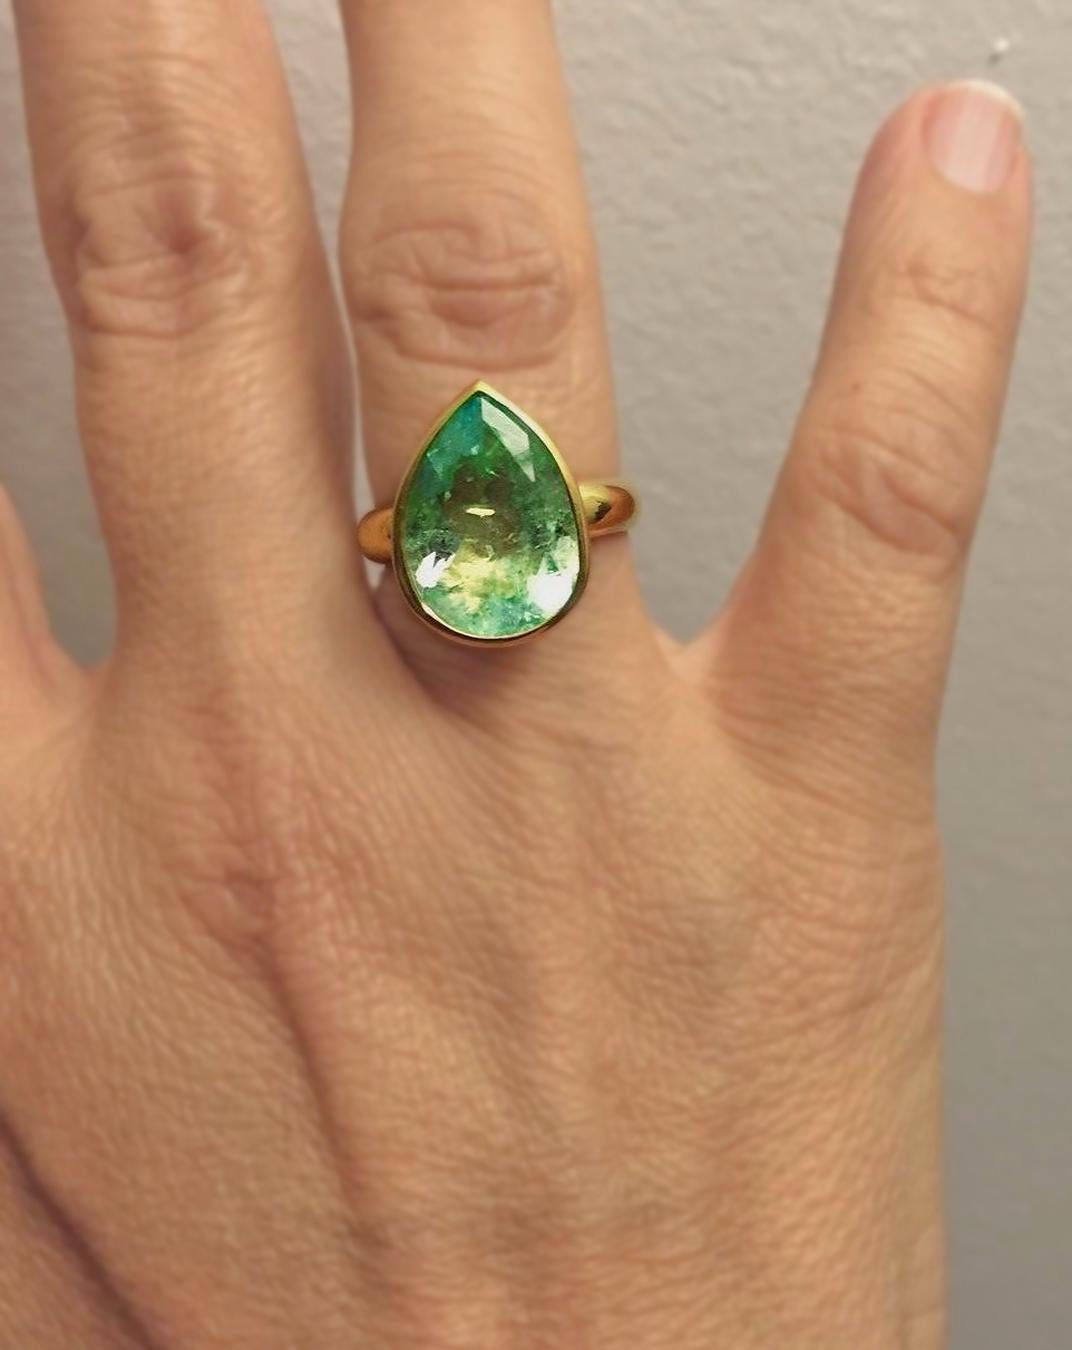 Primary Stone: Natural Colombian Emerald
Shape or Cut: Pear Cut 
Emerald Weight: 4.50 Carats (1 emerald)
Measurements Emerald: 15.00mm x 12.00mm
Average Color: Natural Light Green 
Average Clarity: VS (Type III)
Accent Stones: None 
Ring